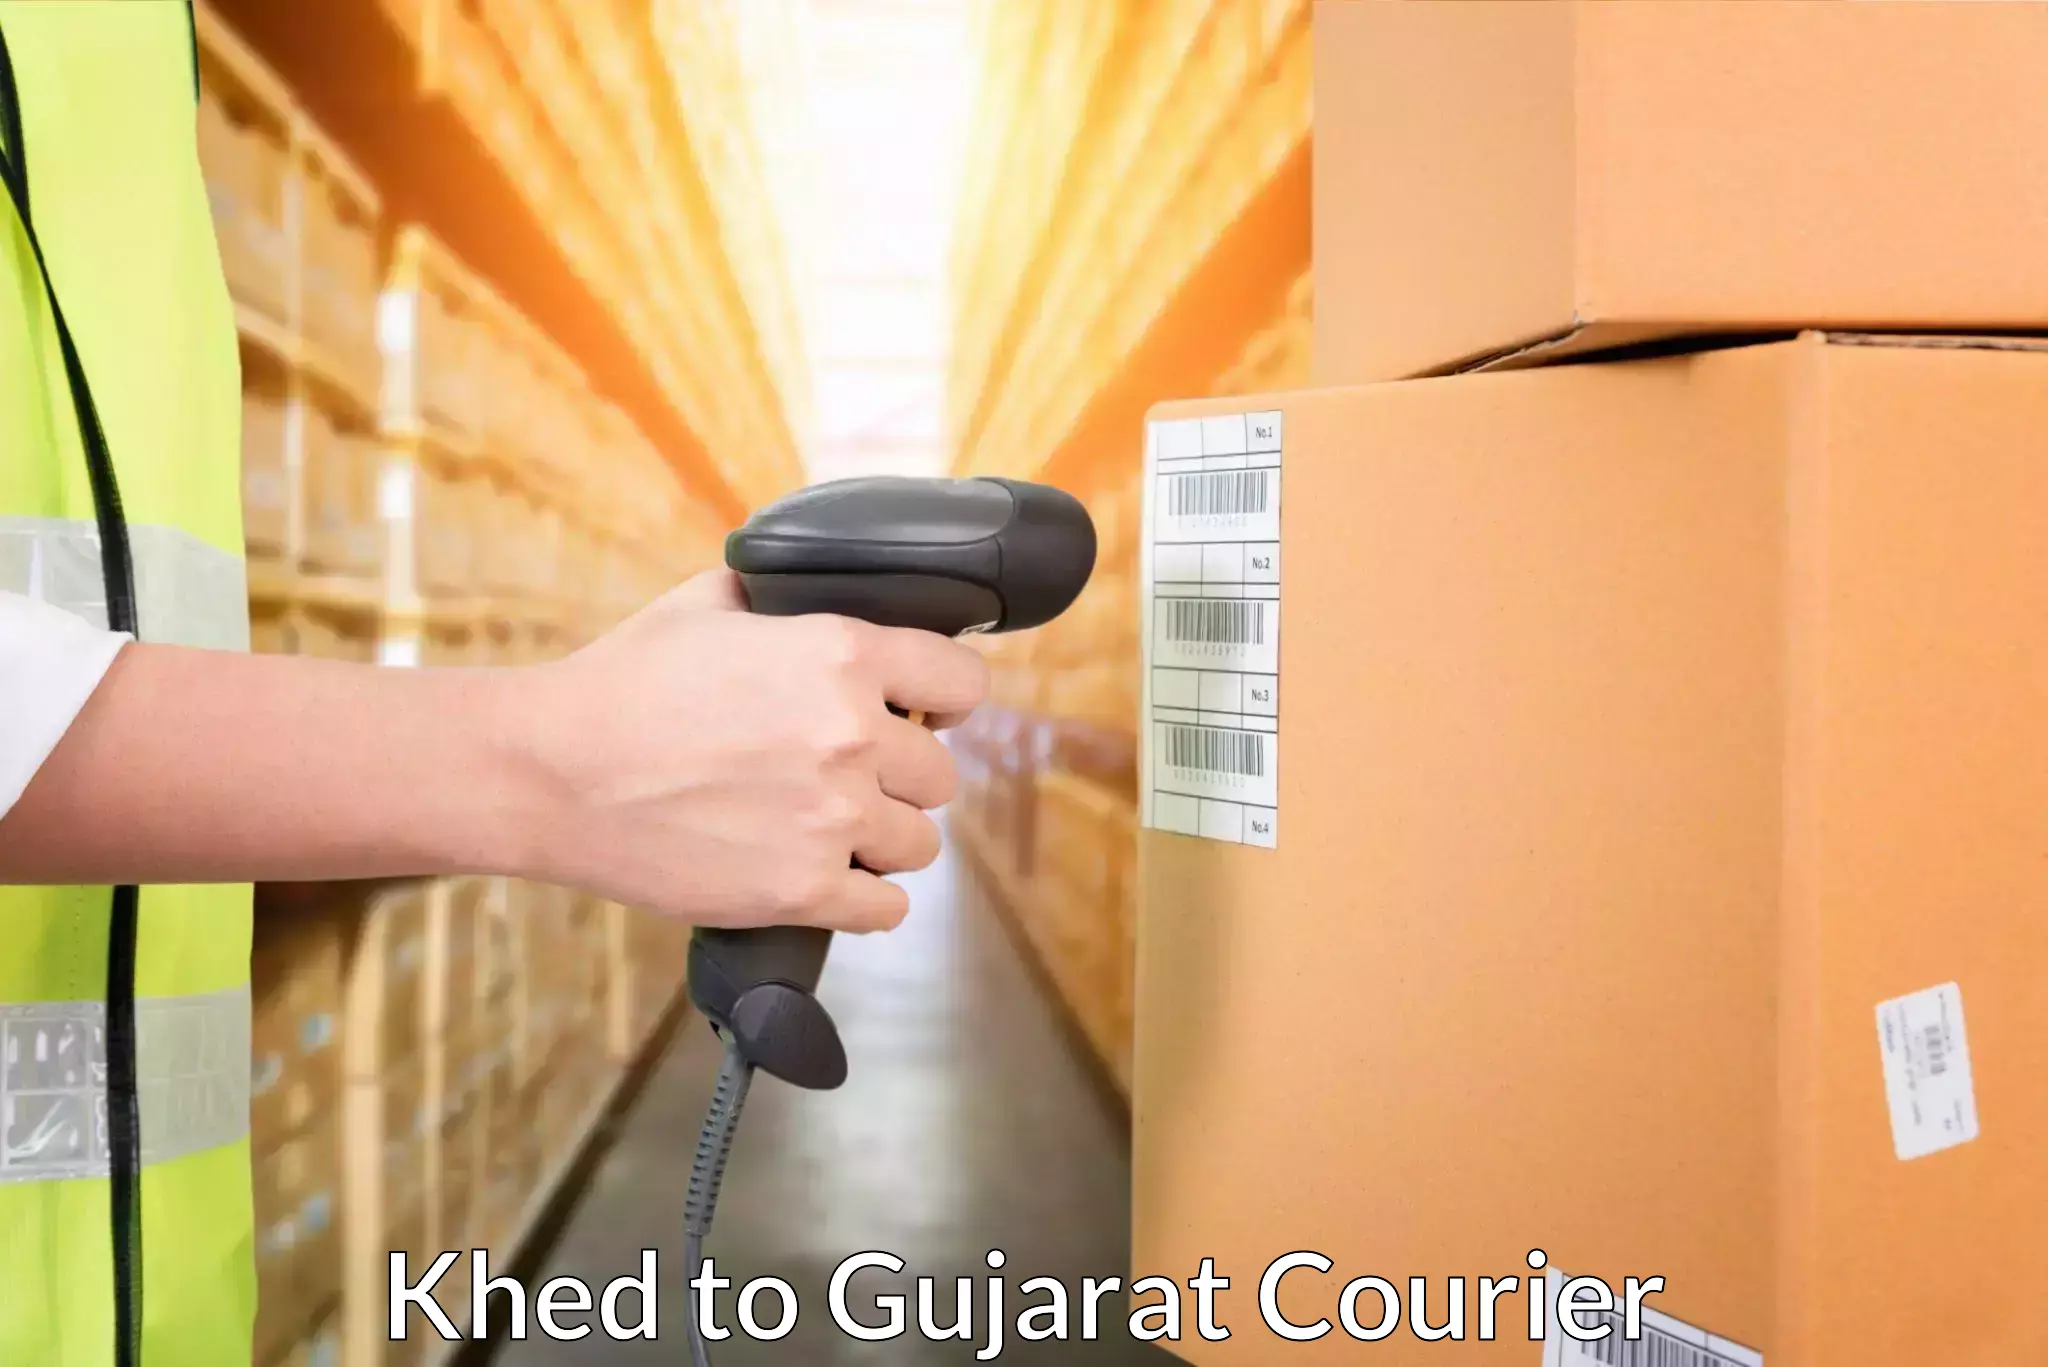 Speedy delivery service Khed to Gujarat